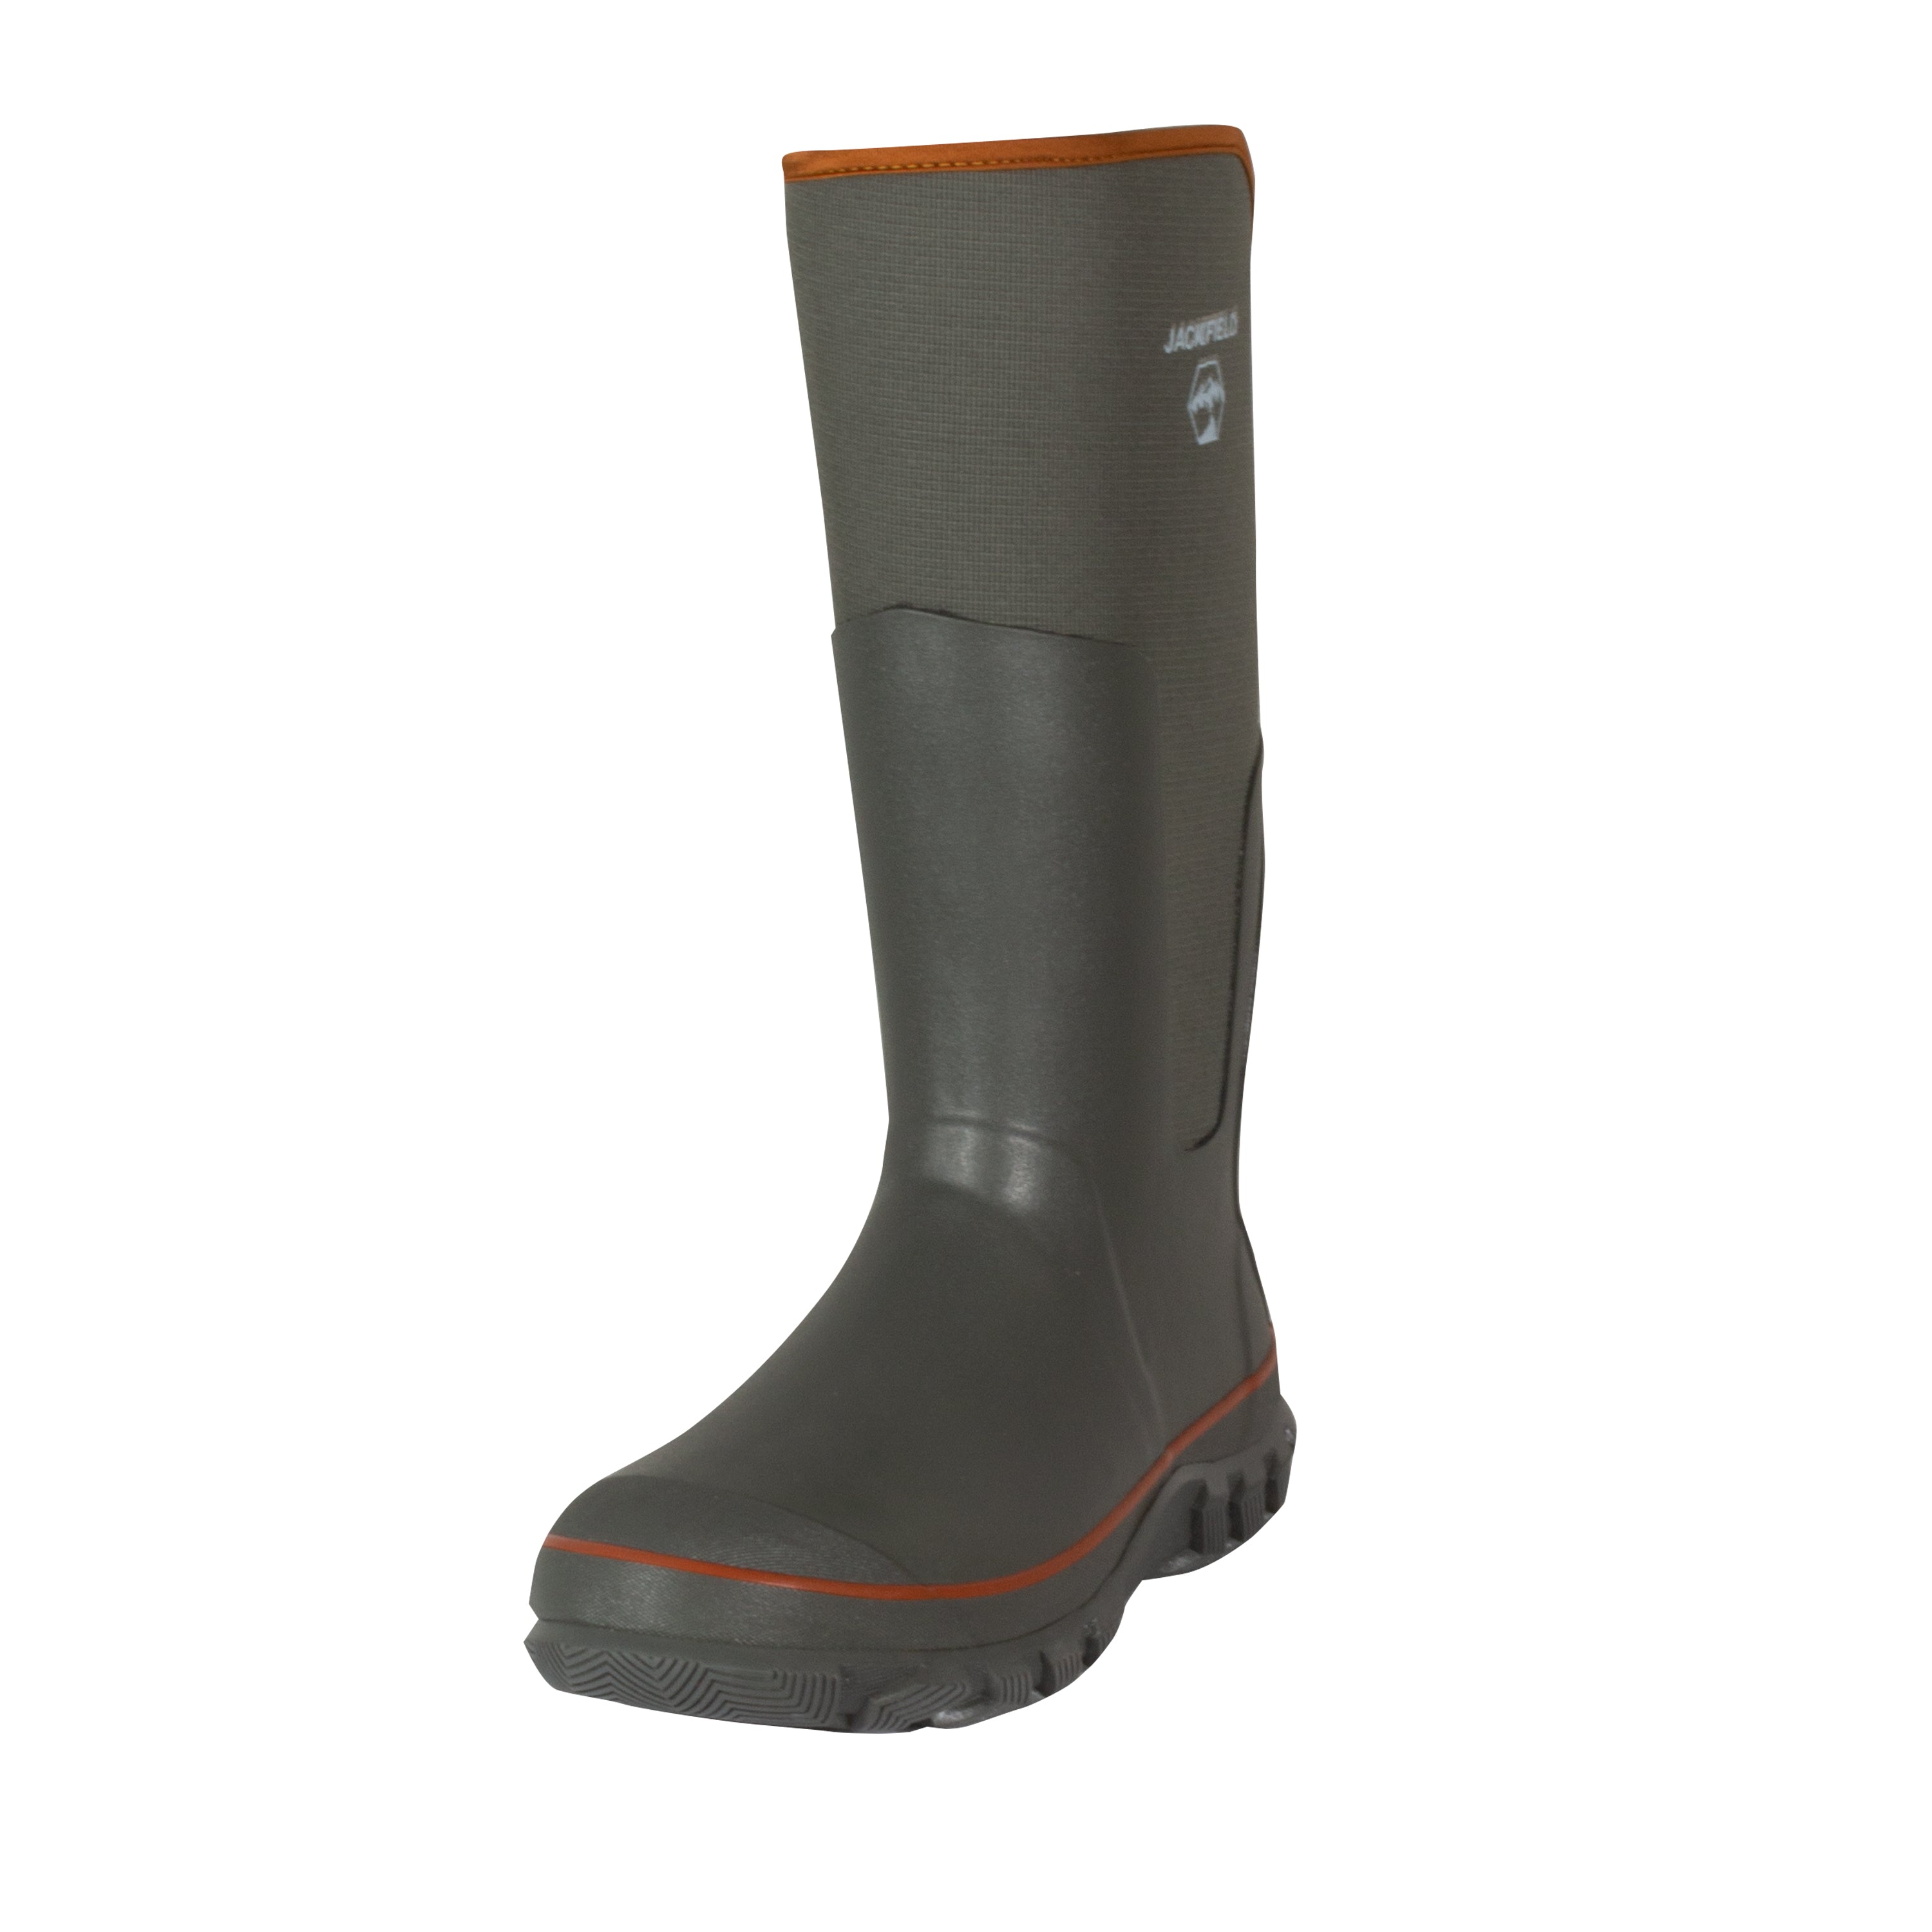 Neoprene and rubber boots - Women’s